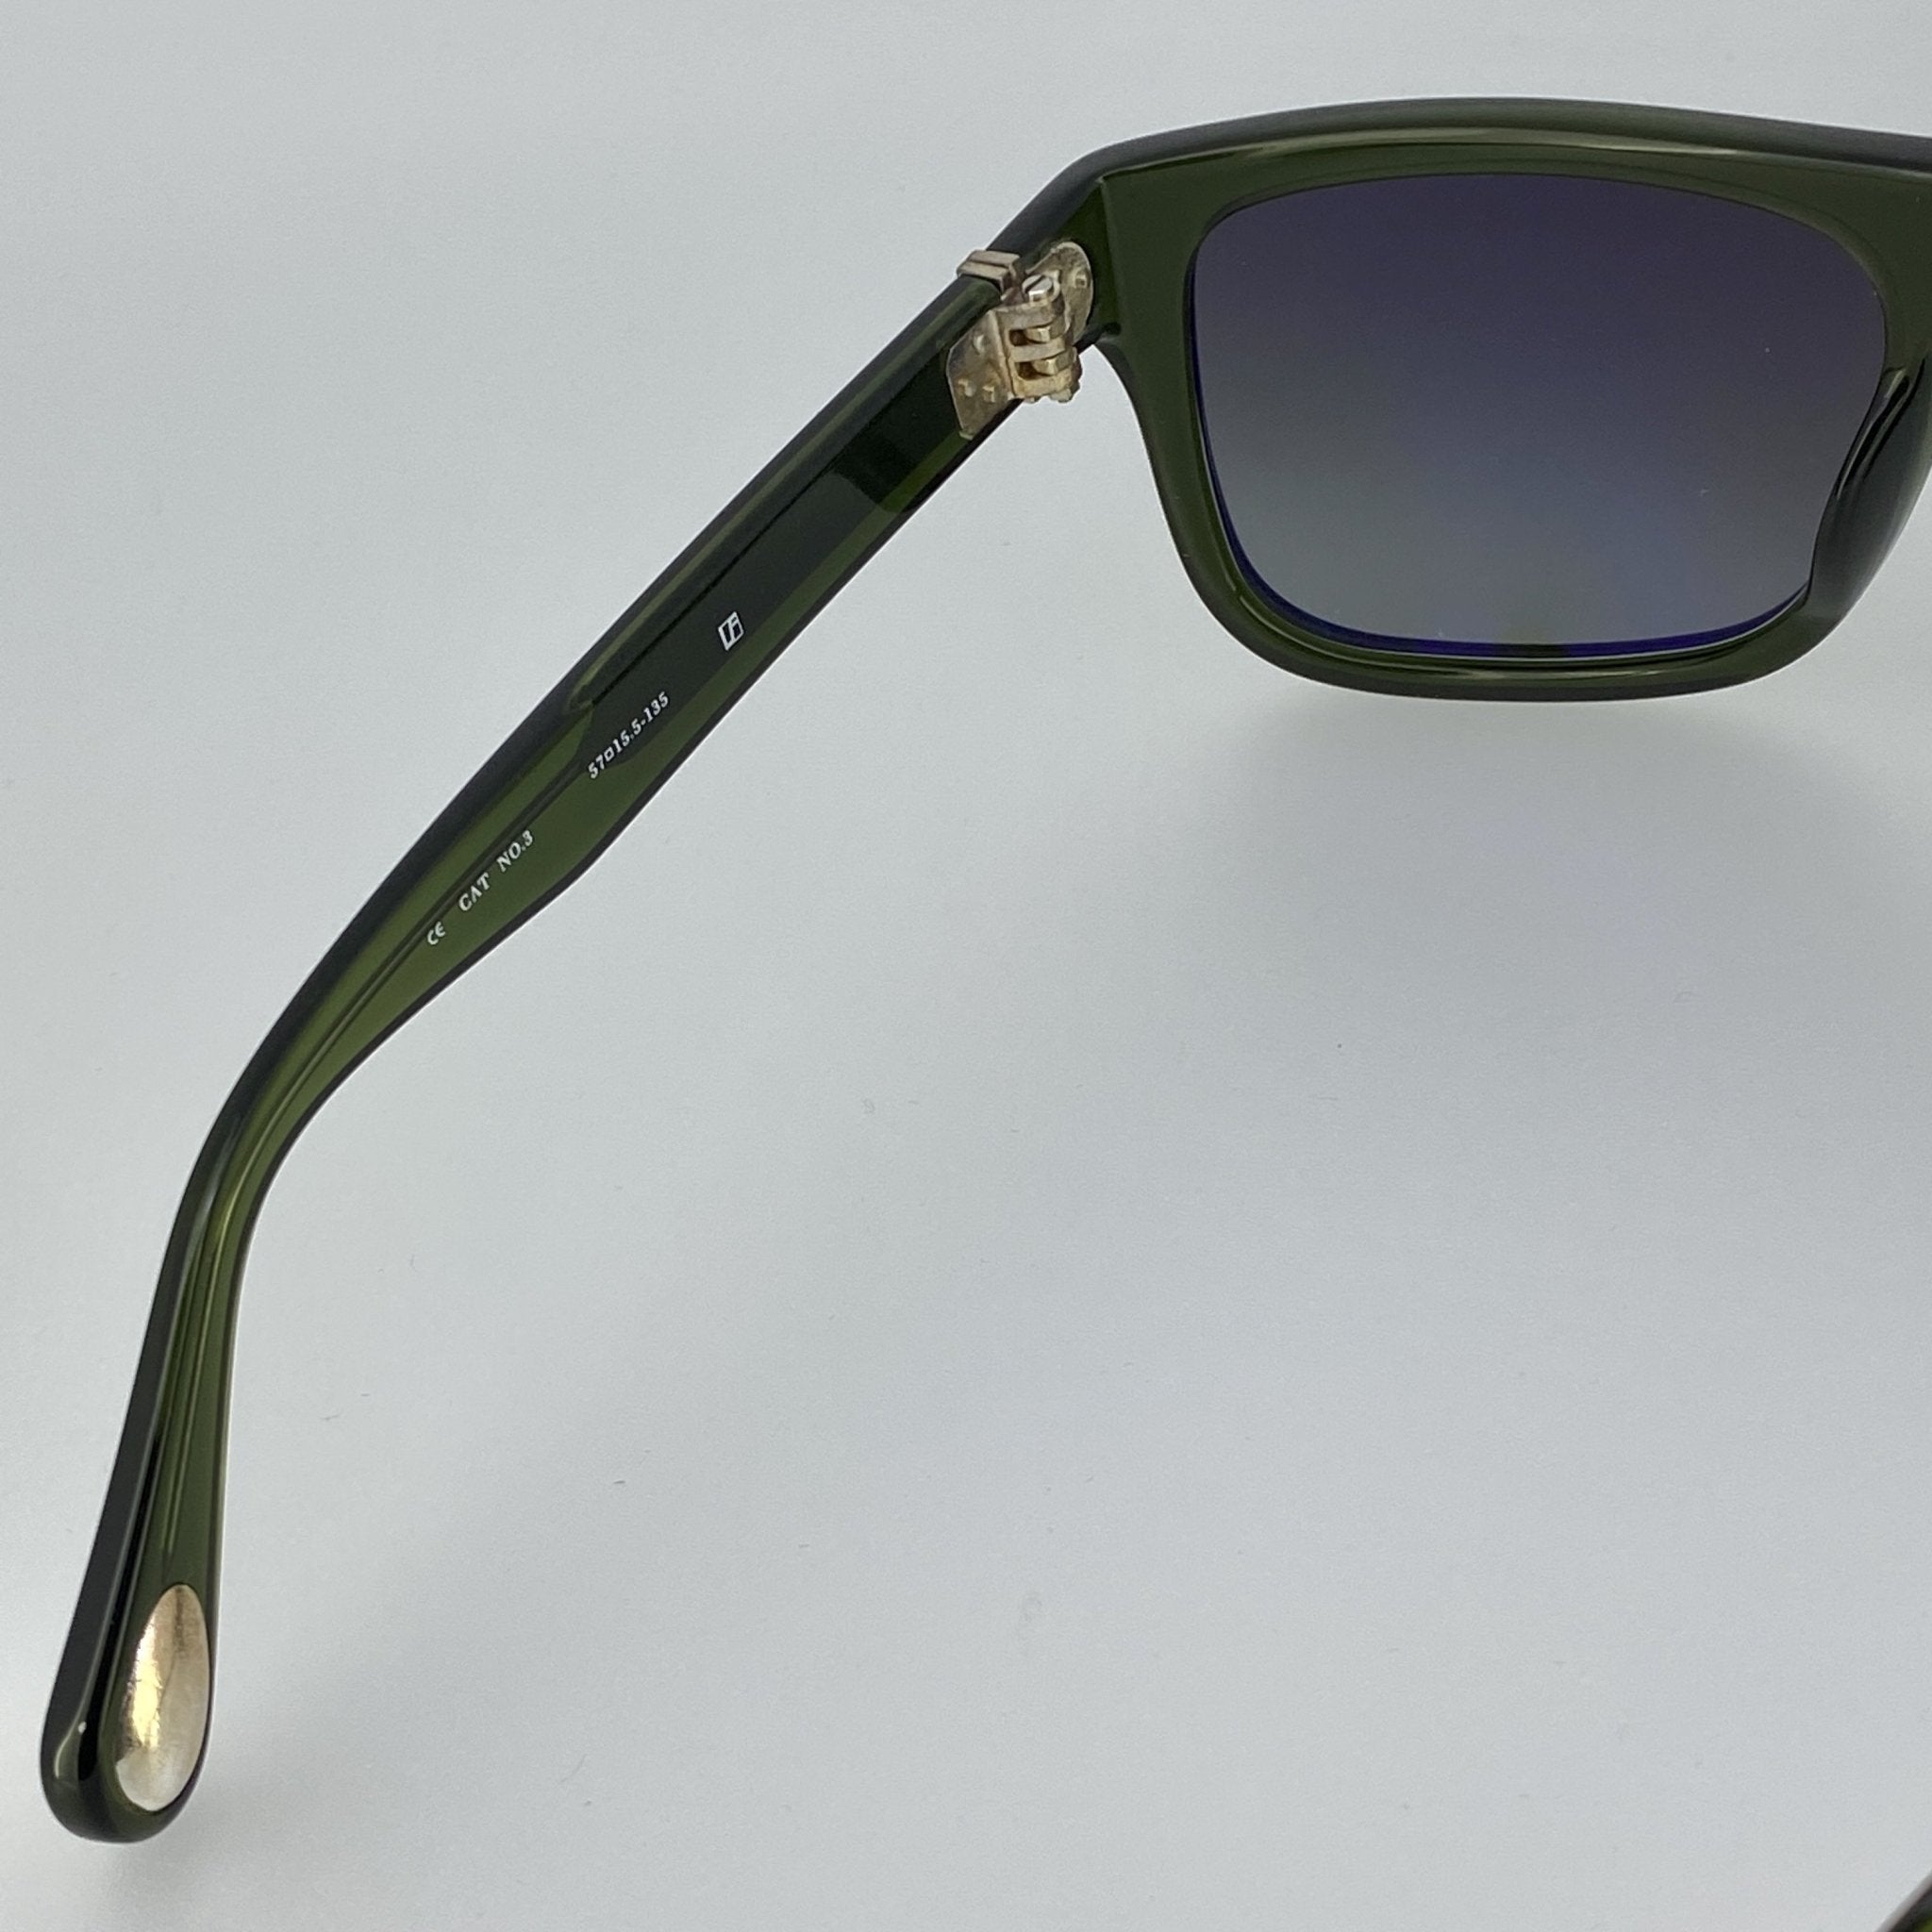 Ann Demeulemeester Sunglasses Flat Top Green 925 Silver with Green Lenses Category 3 Dark Tint AD2C7SUN - Watches & Crystals